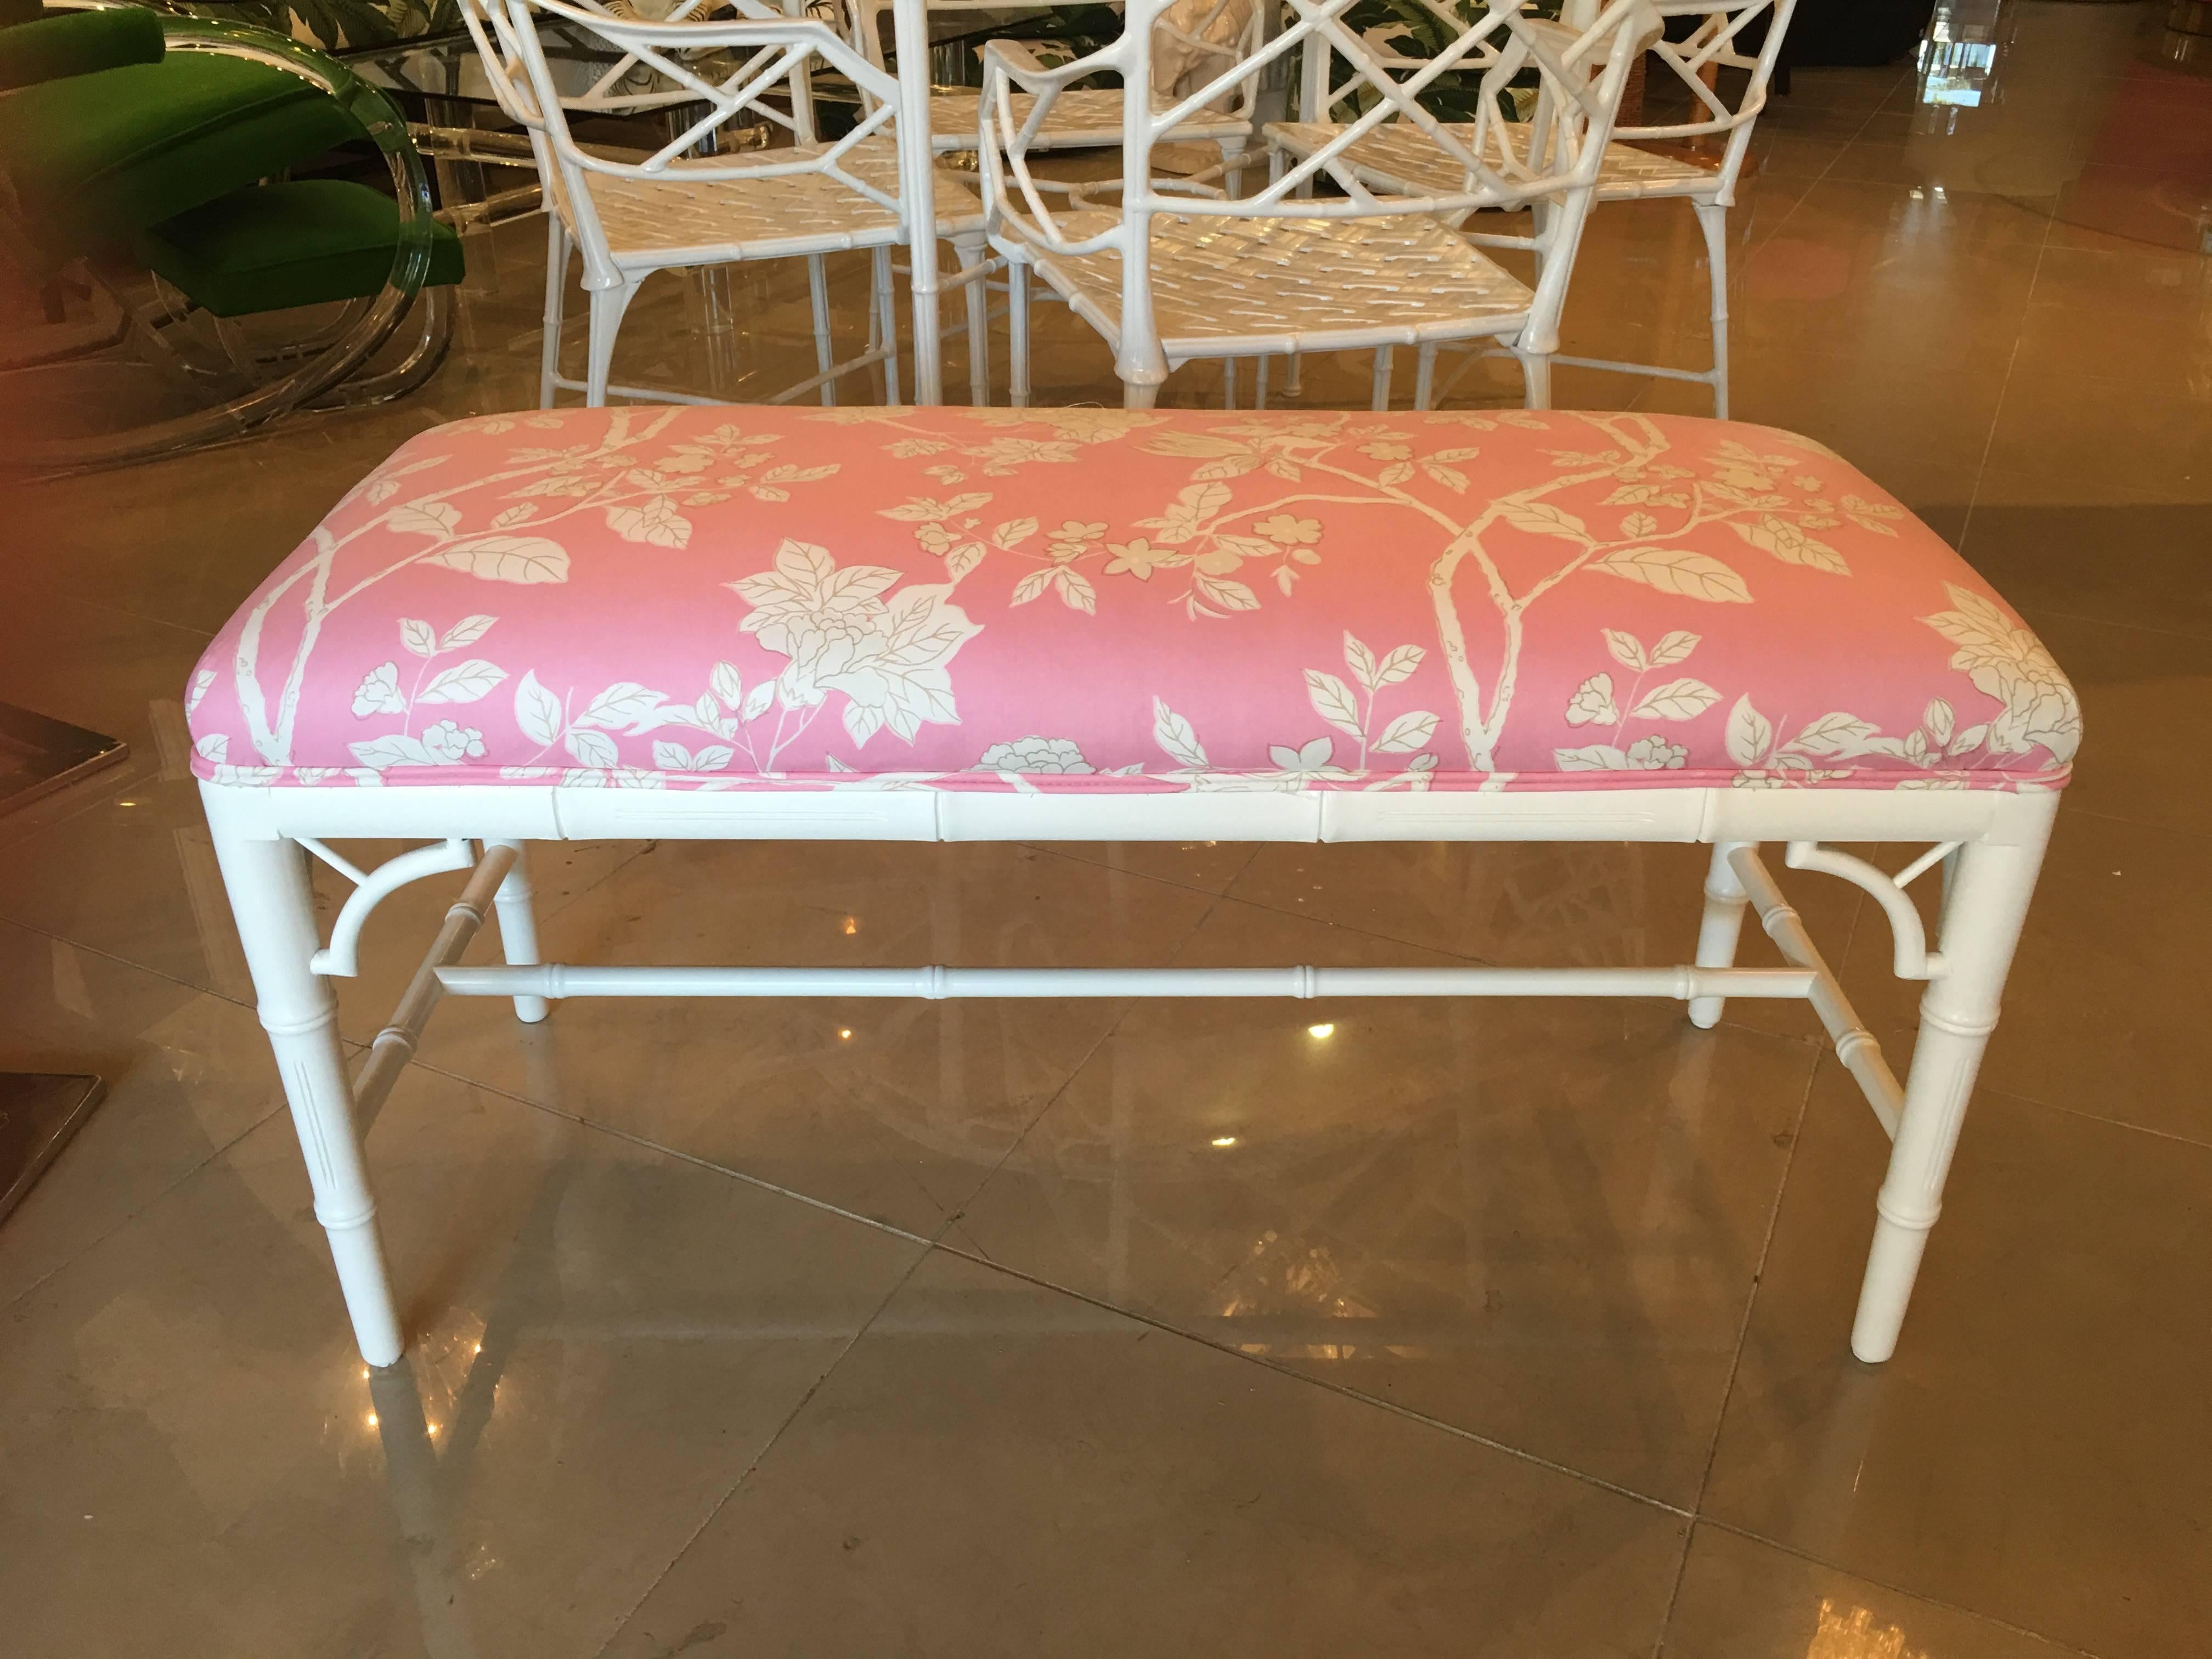 Newly lacquered in a white gloss finish with a newly upholstered pink and white chinoiserie designer fabric faux bamboo, Chinese Chippendale bench. I have a pair of these available. I have more of these available which can be done in a custom